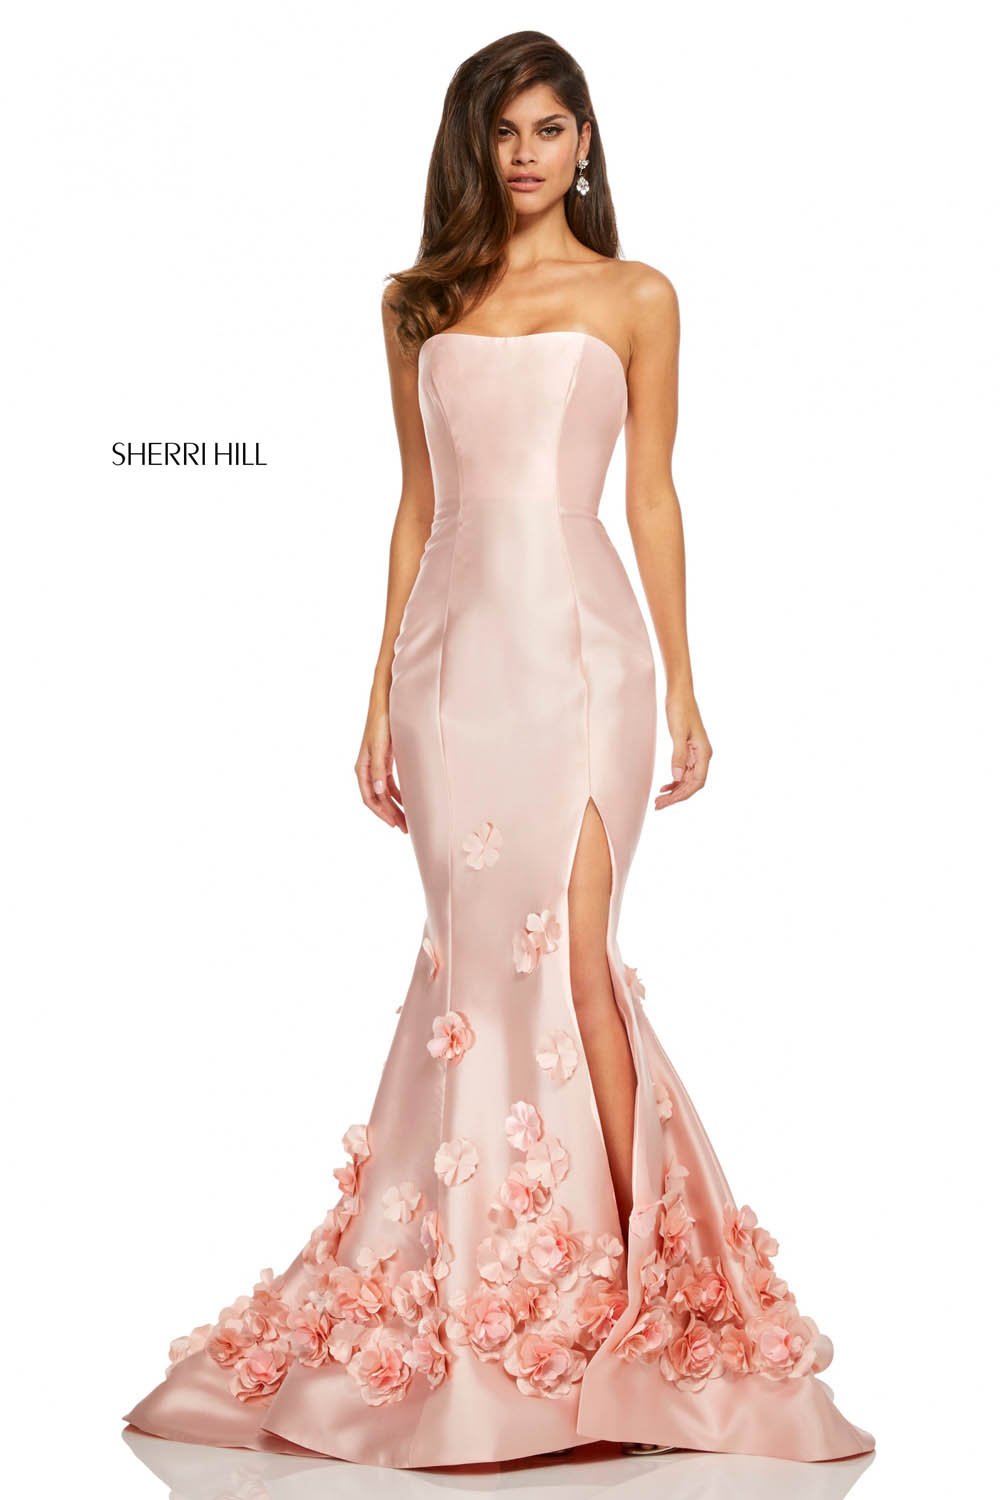 Sherri Hill 52744 dress images in these colors: Light Blue, Yellow, Black, Red, Ivory, Blush.